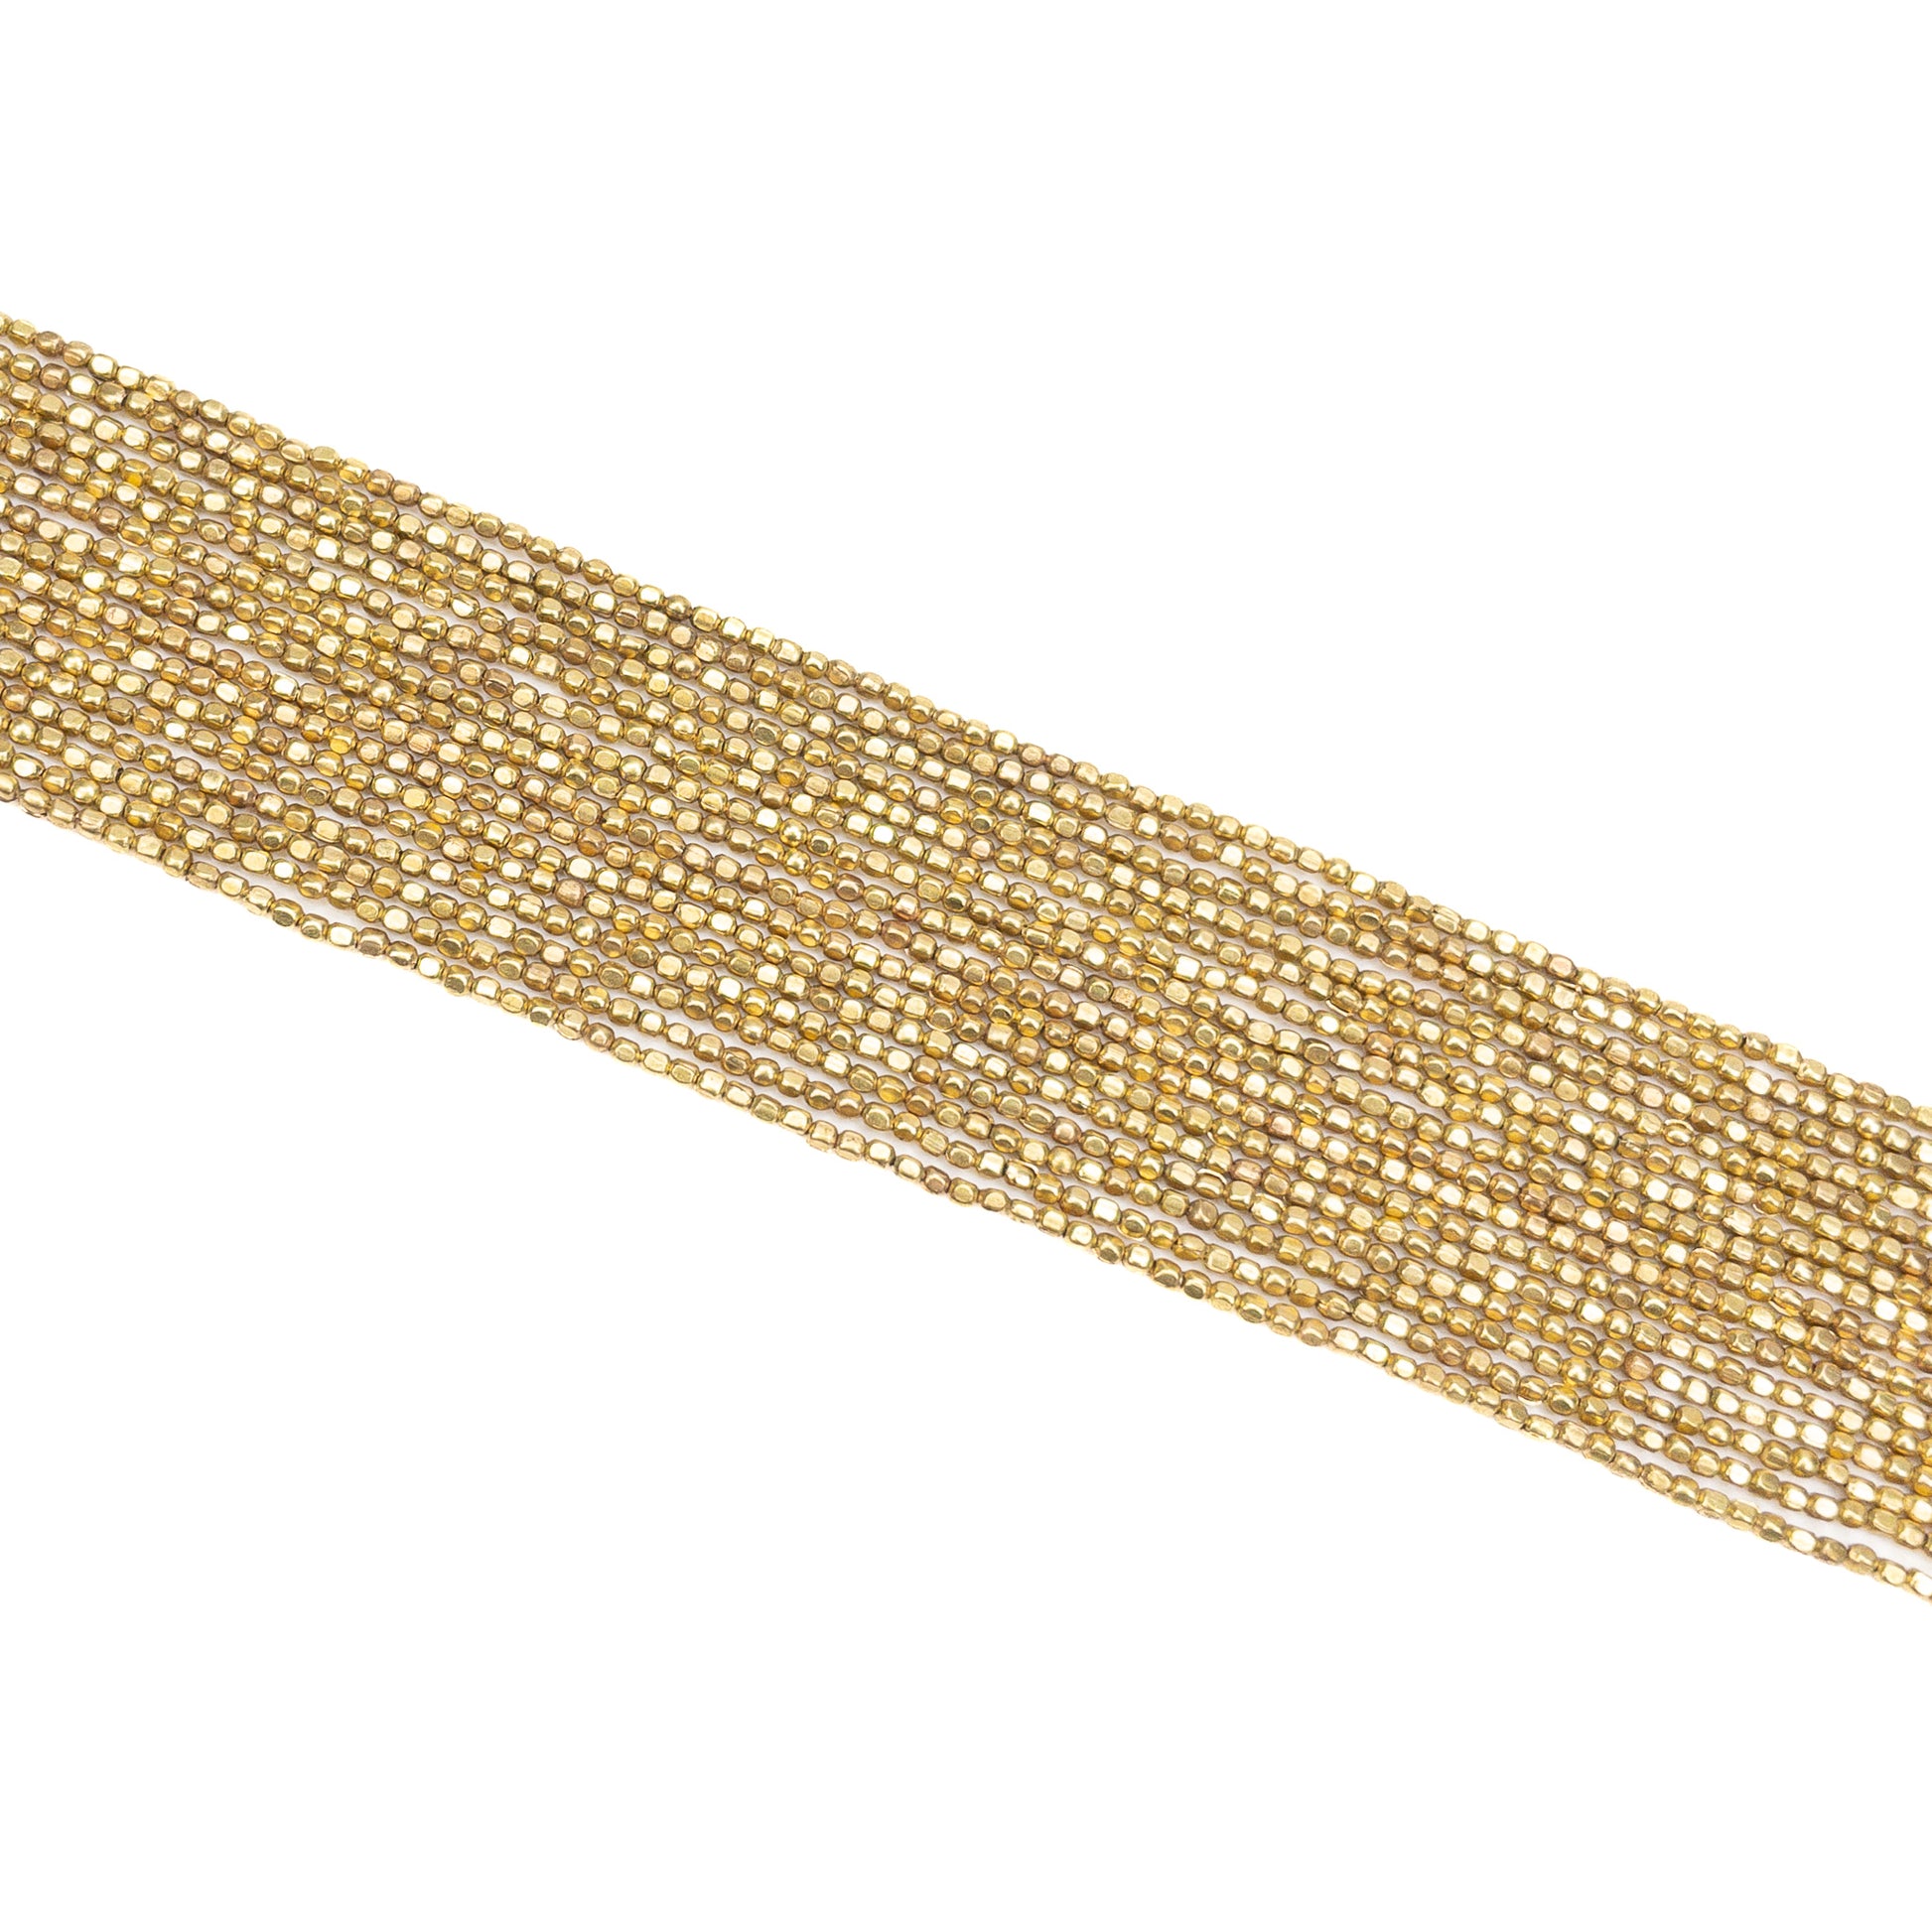 2mm Soft Cube Bead (4 Colors Available) - 24" Strand